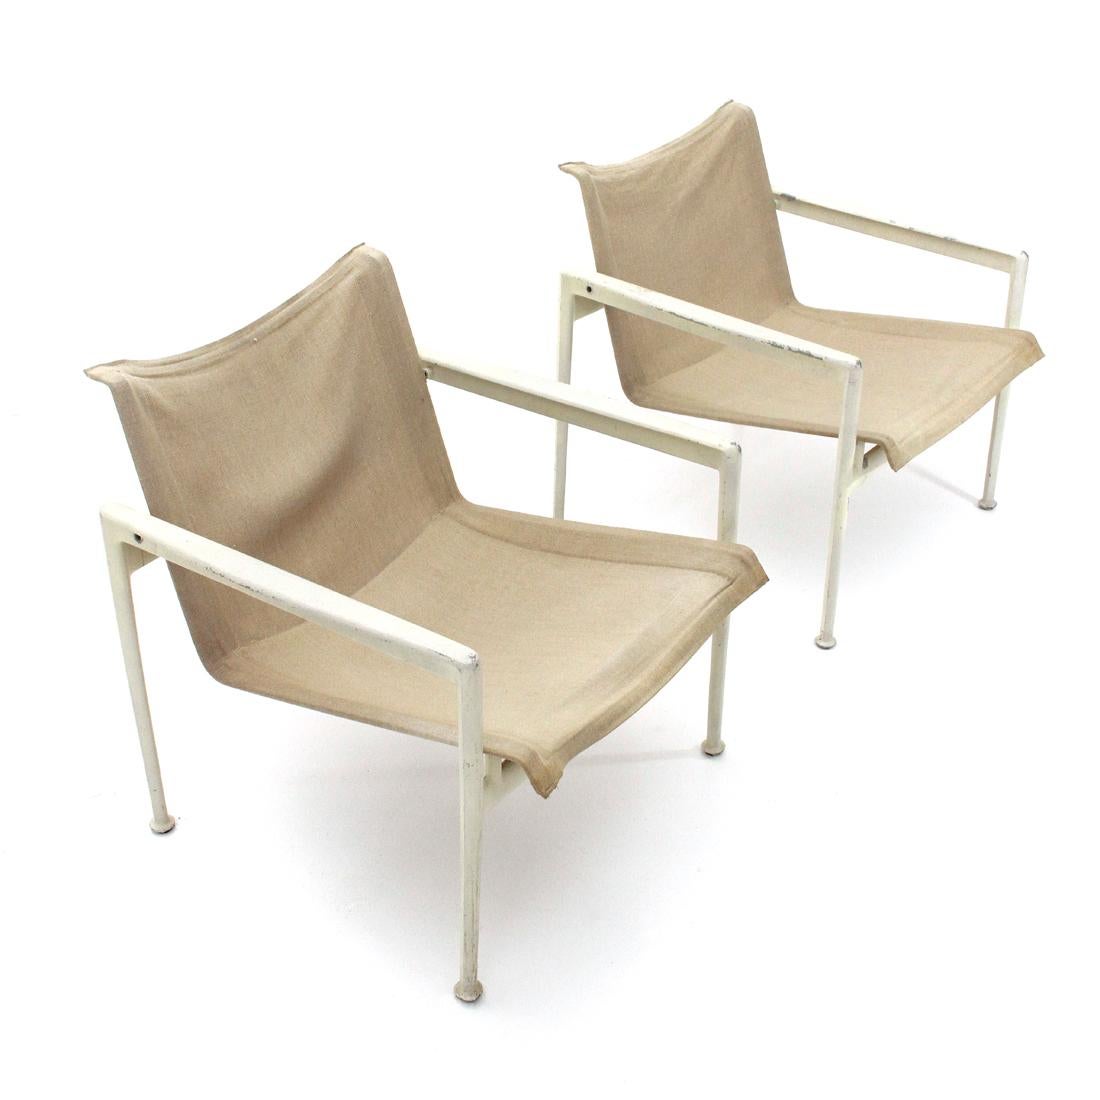 Pair of armchairs produced by Knoll in the 1960s on a project by Richard Schultz.
White painted aluminum structure.
Seat and back in raw cotton.
Structure in good condition, lack of paint, threadbare fabric, a screw replaced with